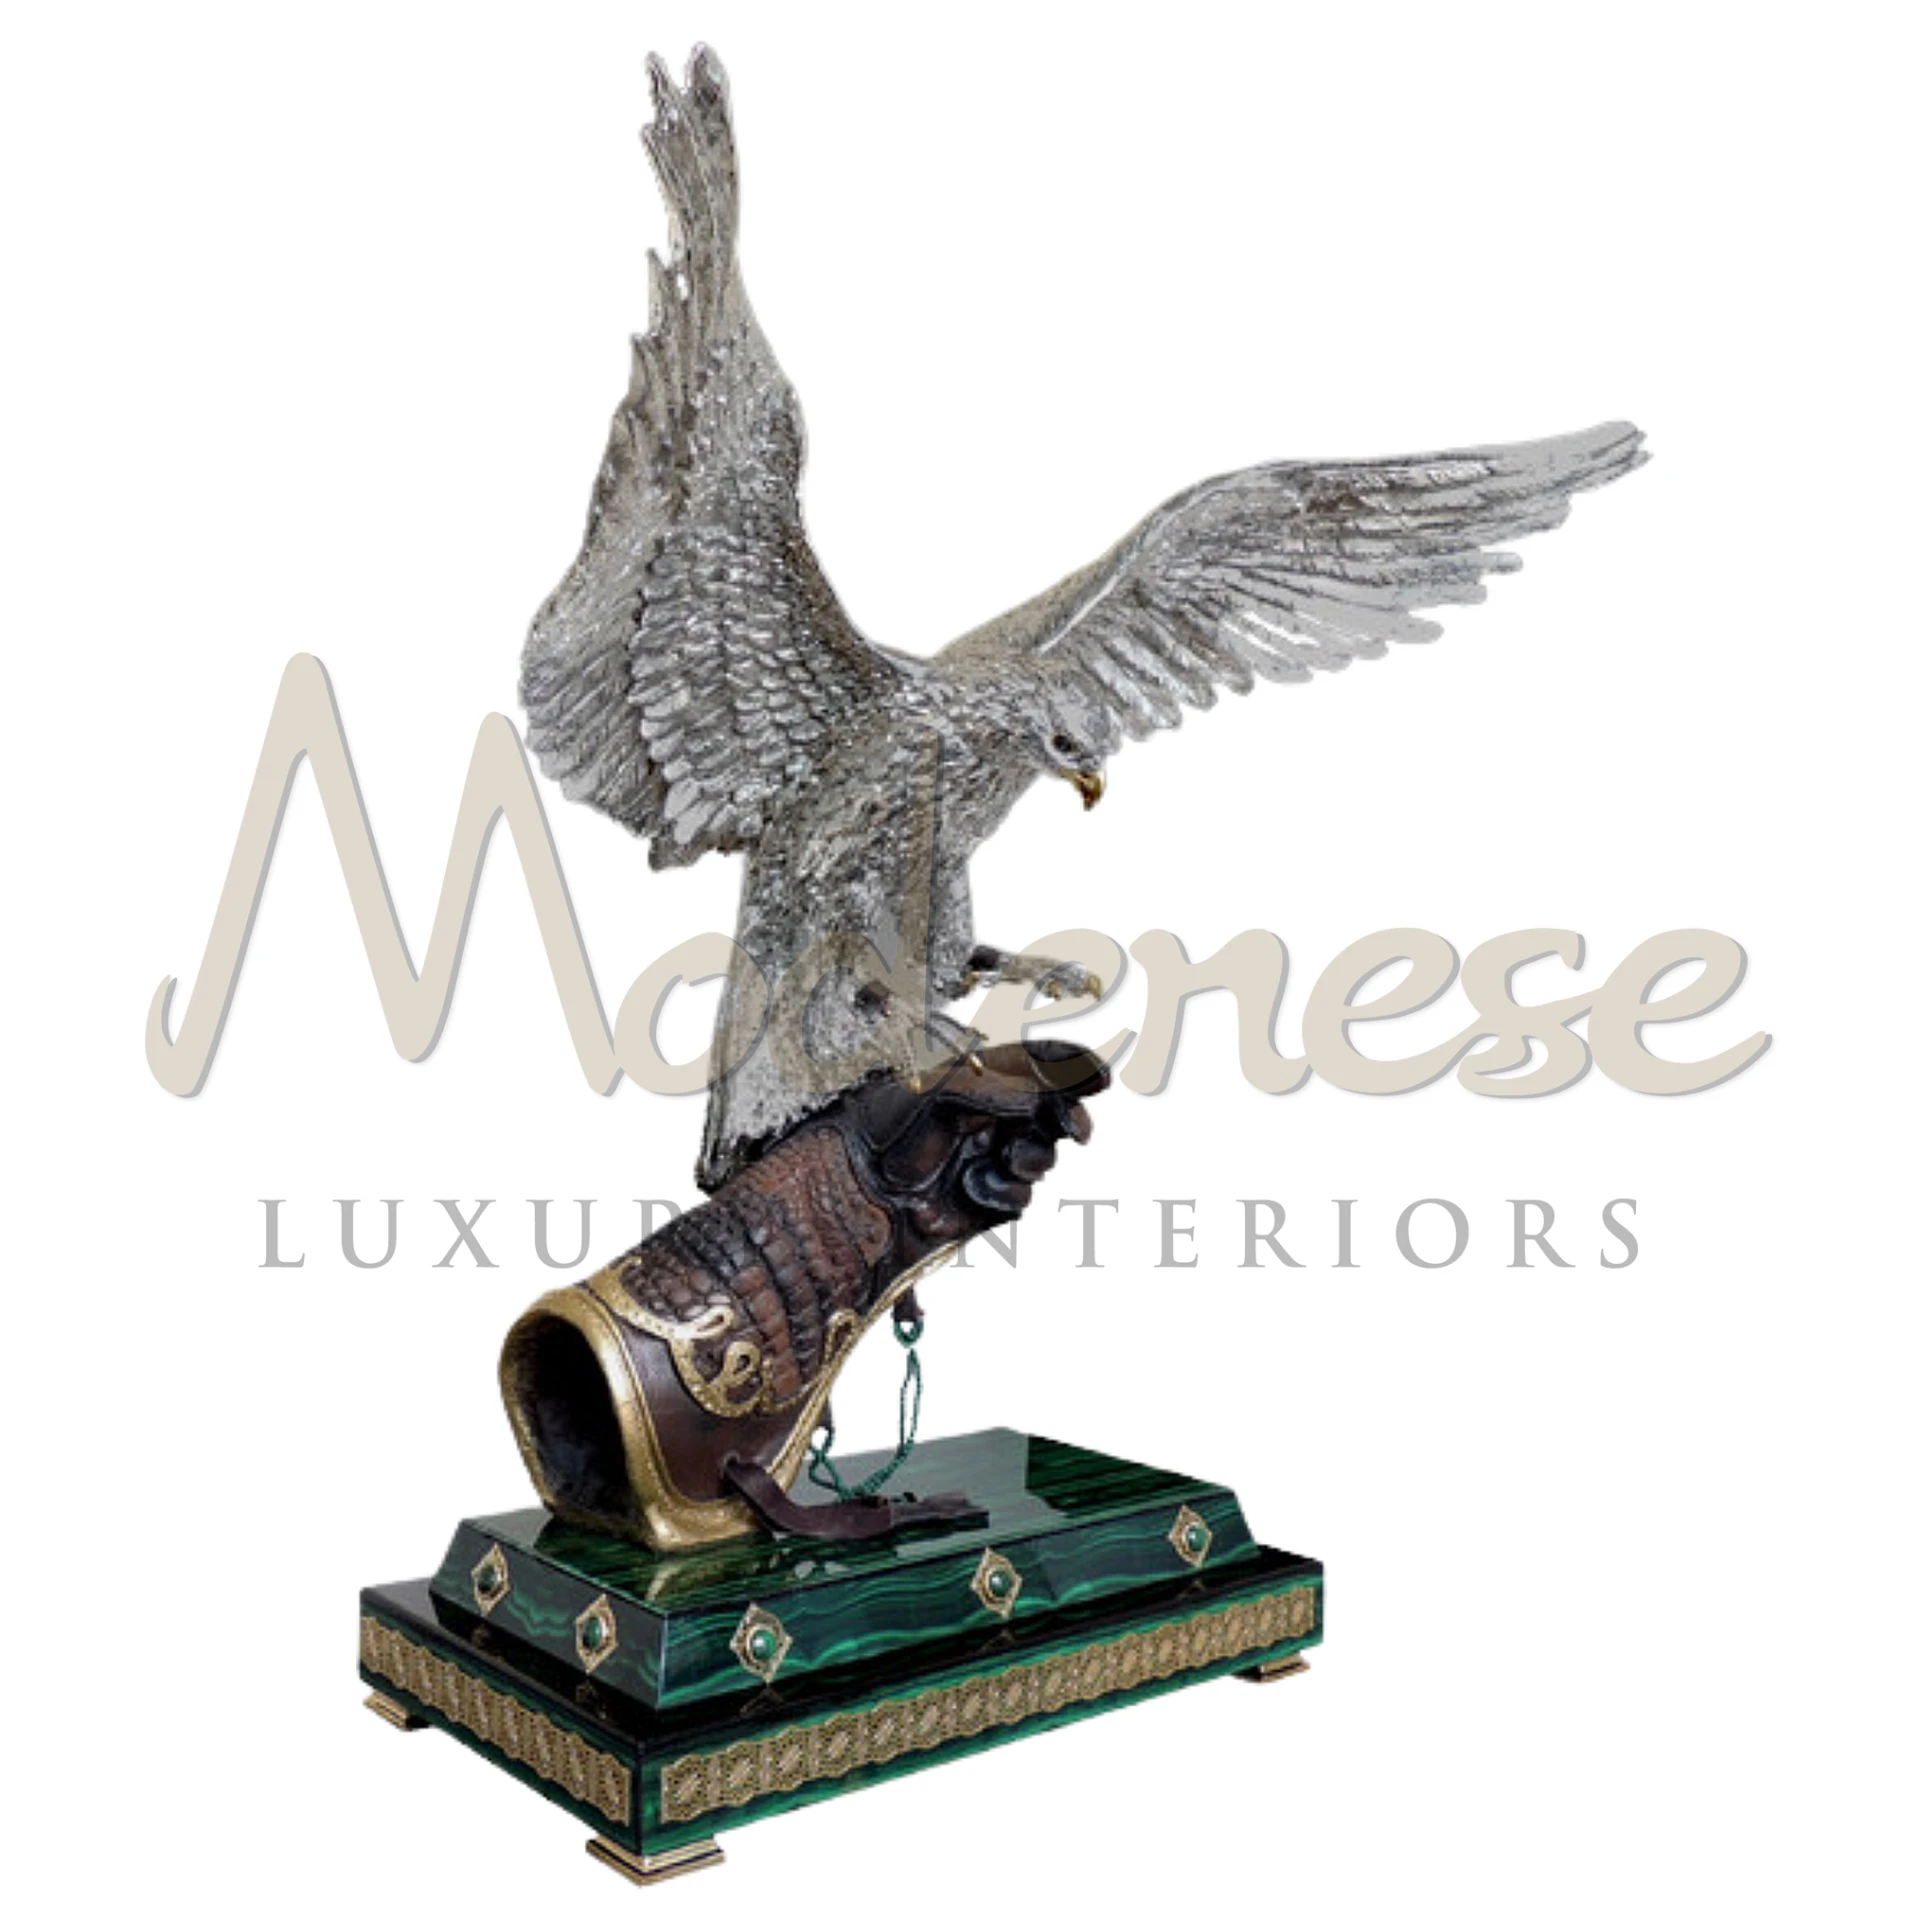 Royal Silver Falcon, a statuette symbolizing freedom and power, perfect as a statement piece for luxury and classic styled interior décor.